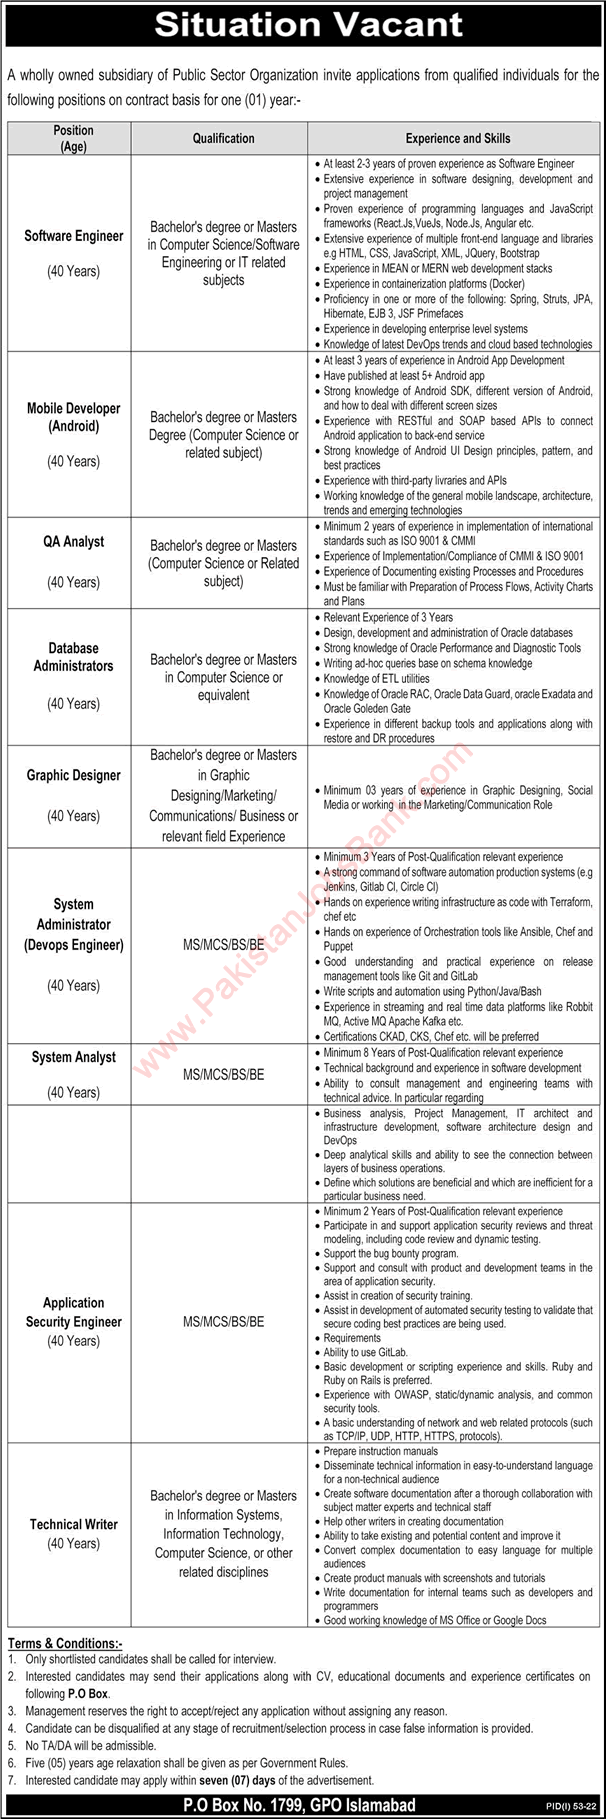 PO Box 1799 GPO Islamabad Jobs July 2022 Software Engineer, Graphic Designer & Others Public Sector Organization Latest